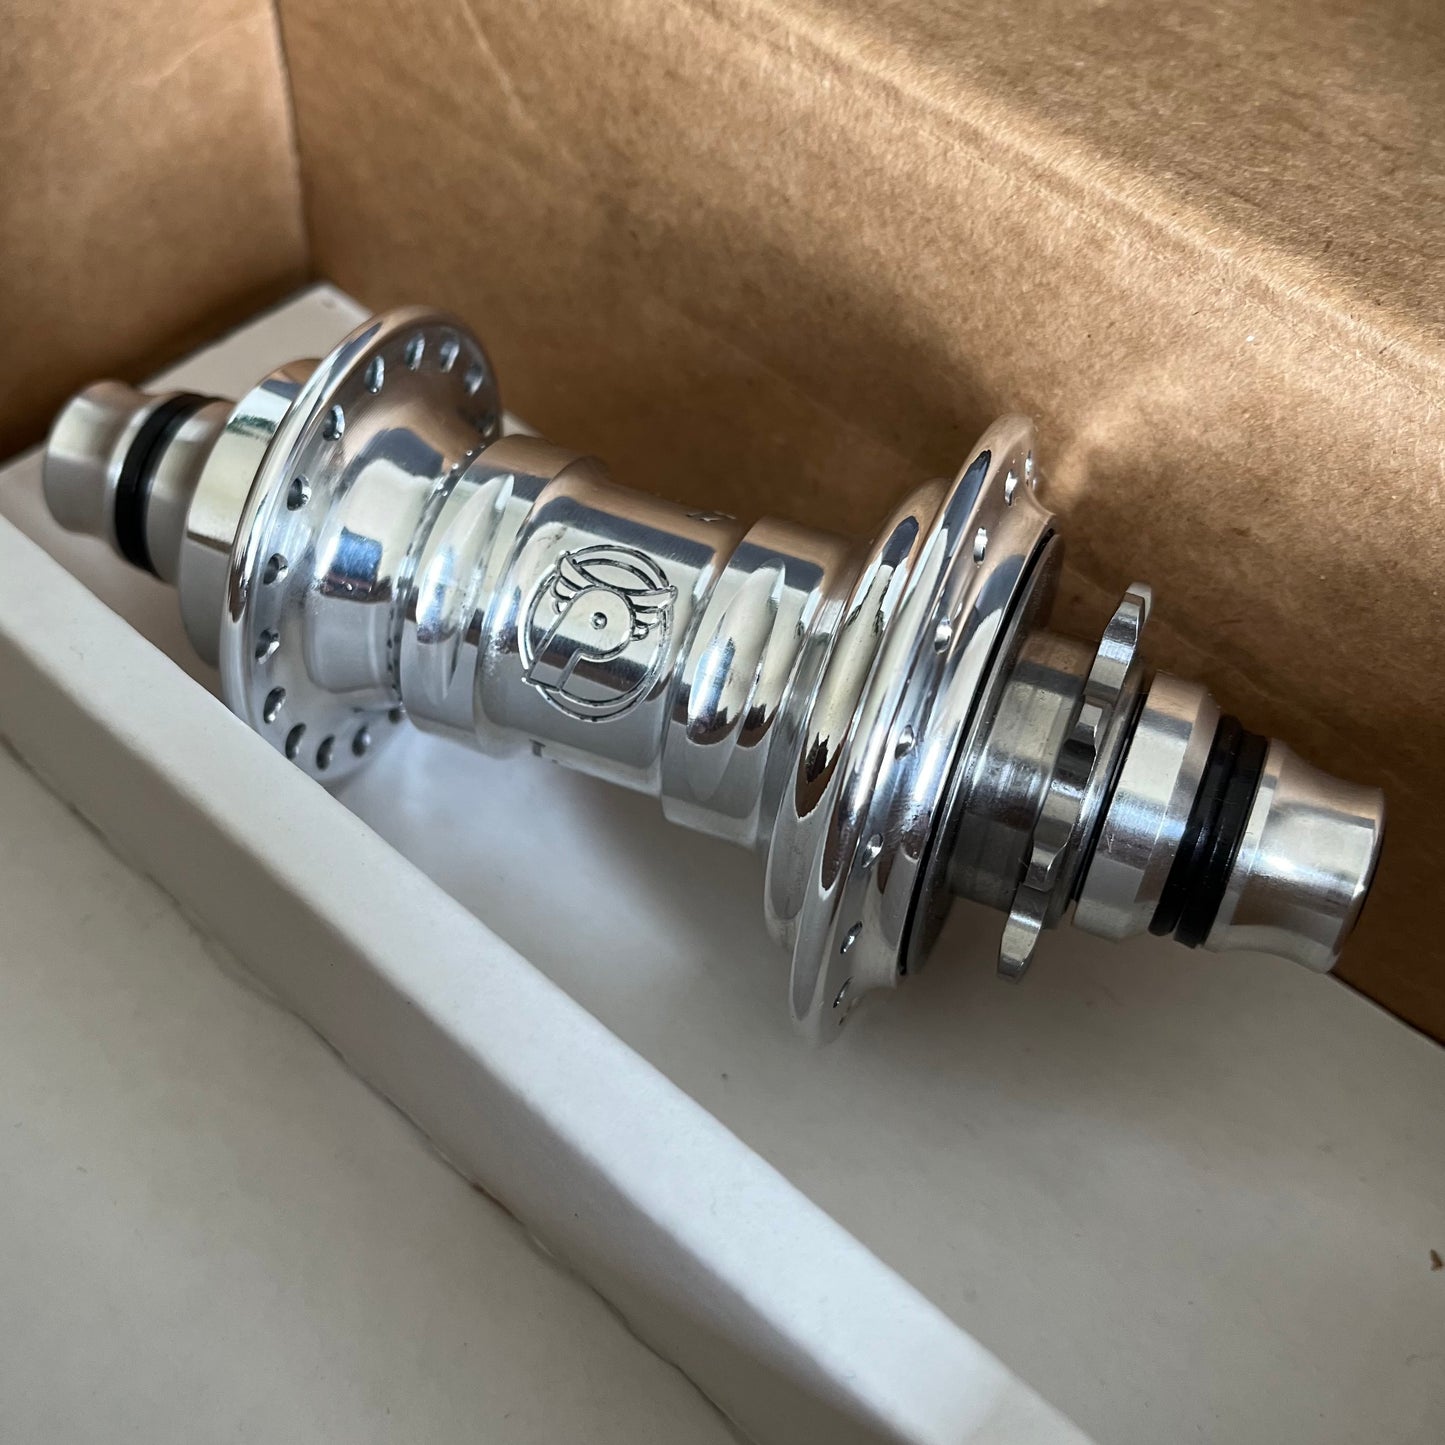 Profile Racing Mini Female LHD Cassette Nabe / Hub Polished with Crmo or Ti Driver